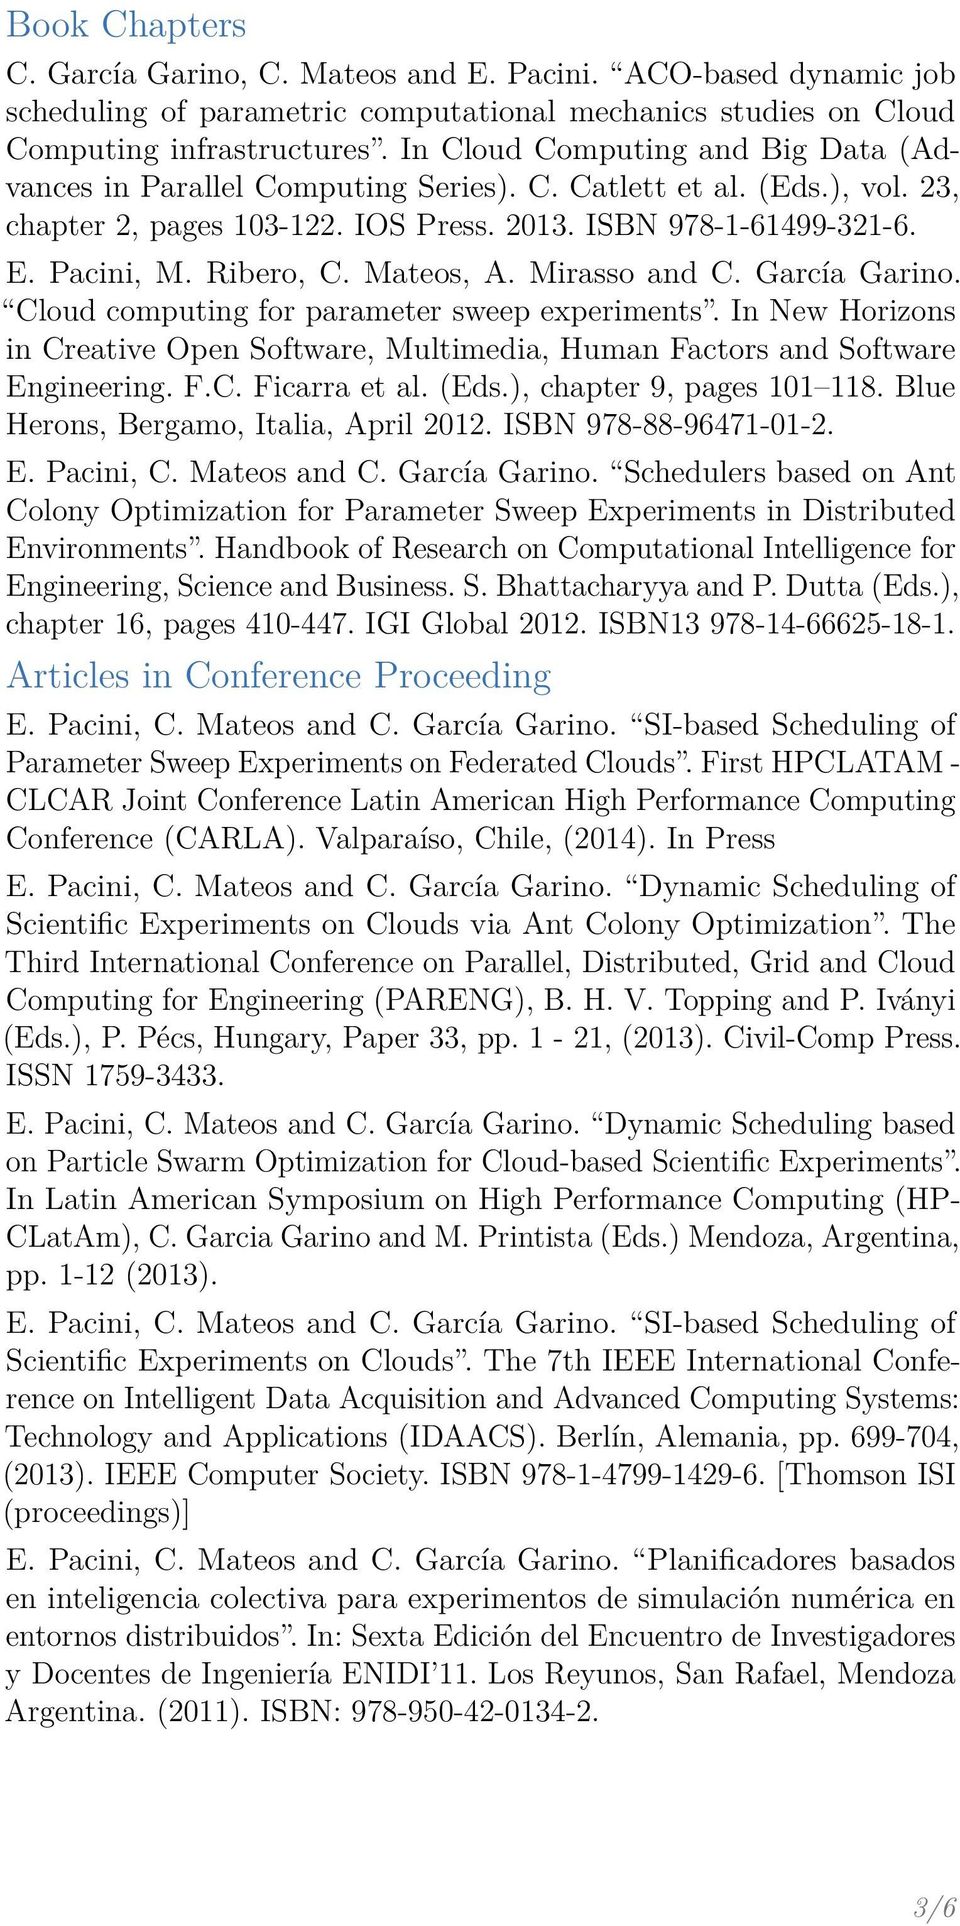 Mateos, A. Mirasso and C. García Garino. Cloud computing for parameter sweep experiments. In New Horizons in Creative Open Software, Multimedia, Human Factors and Software Engineering. F.C. Ficarra et al.